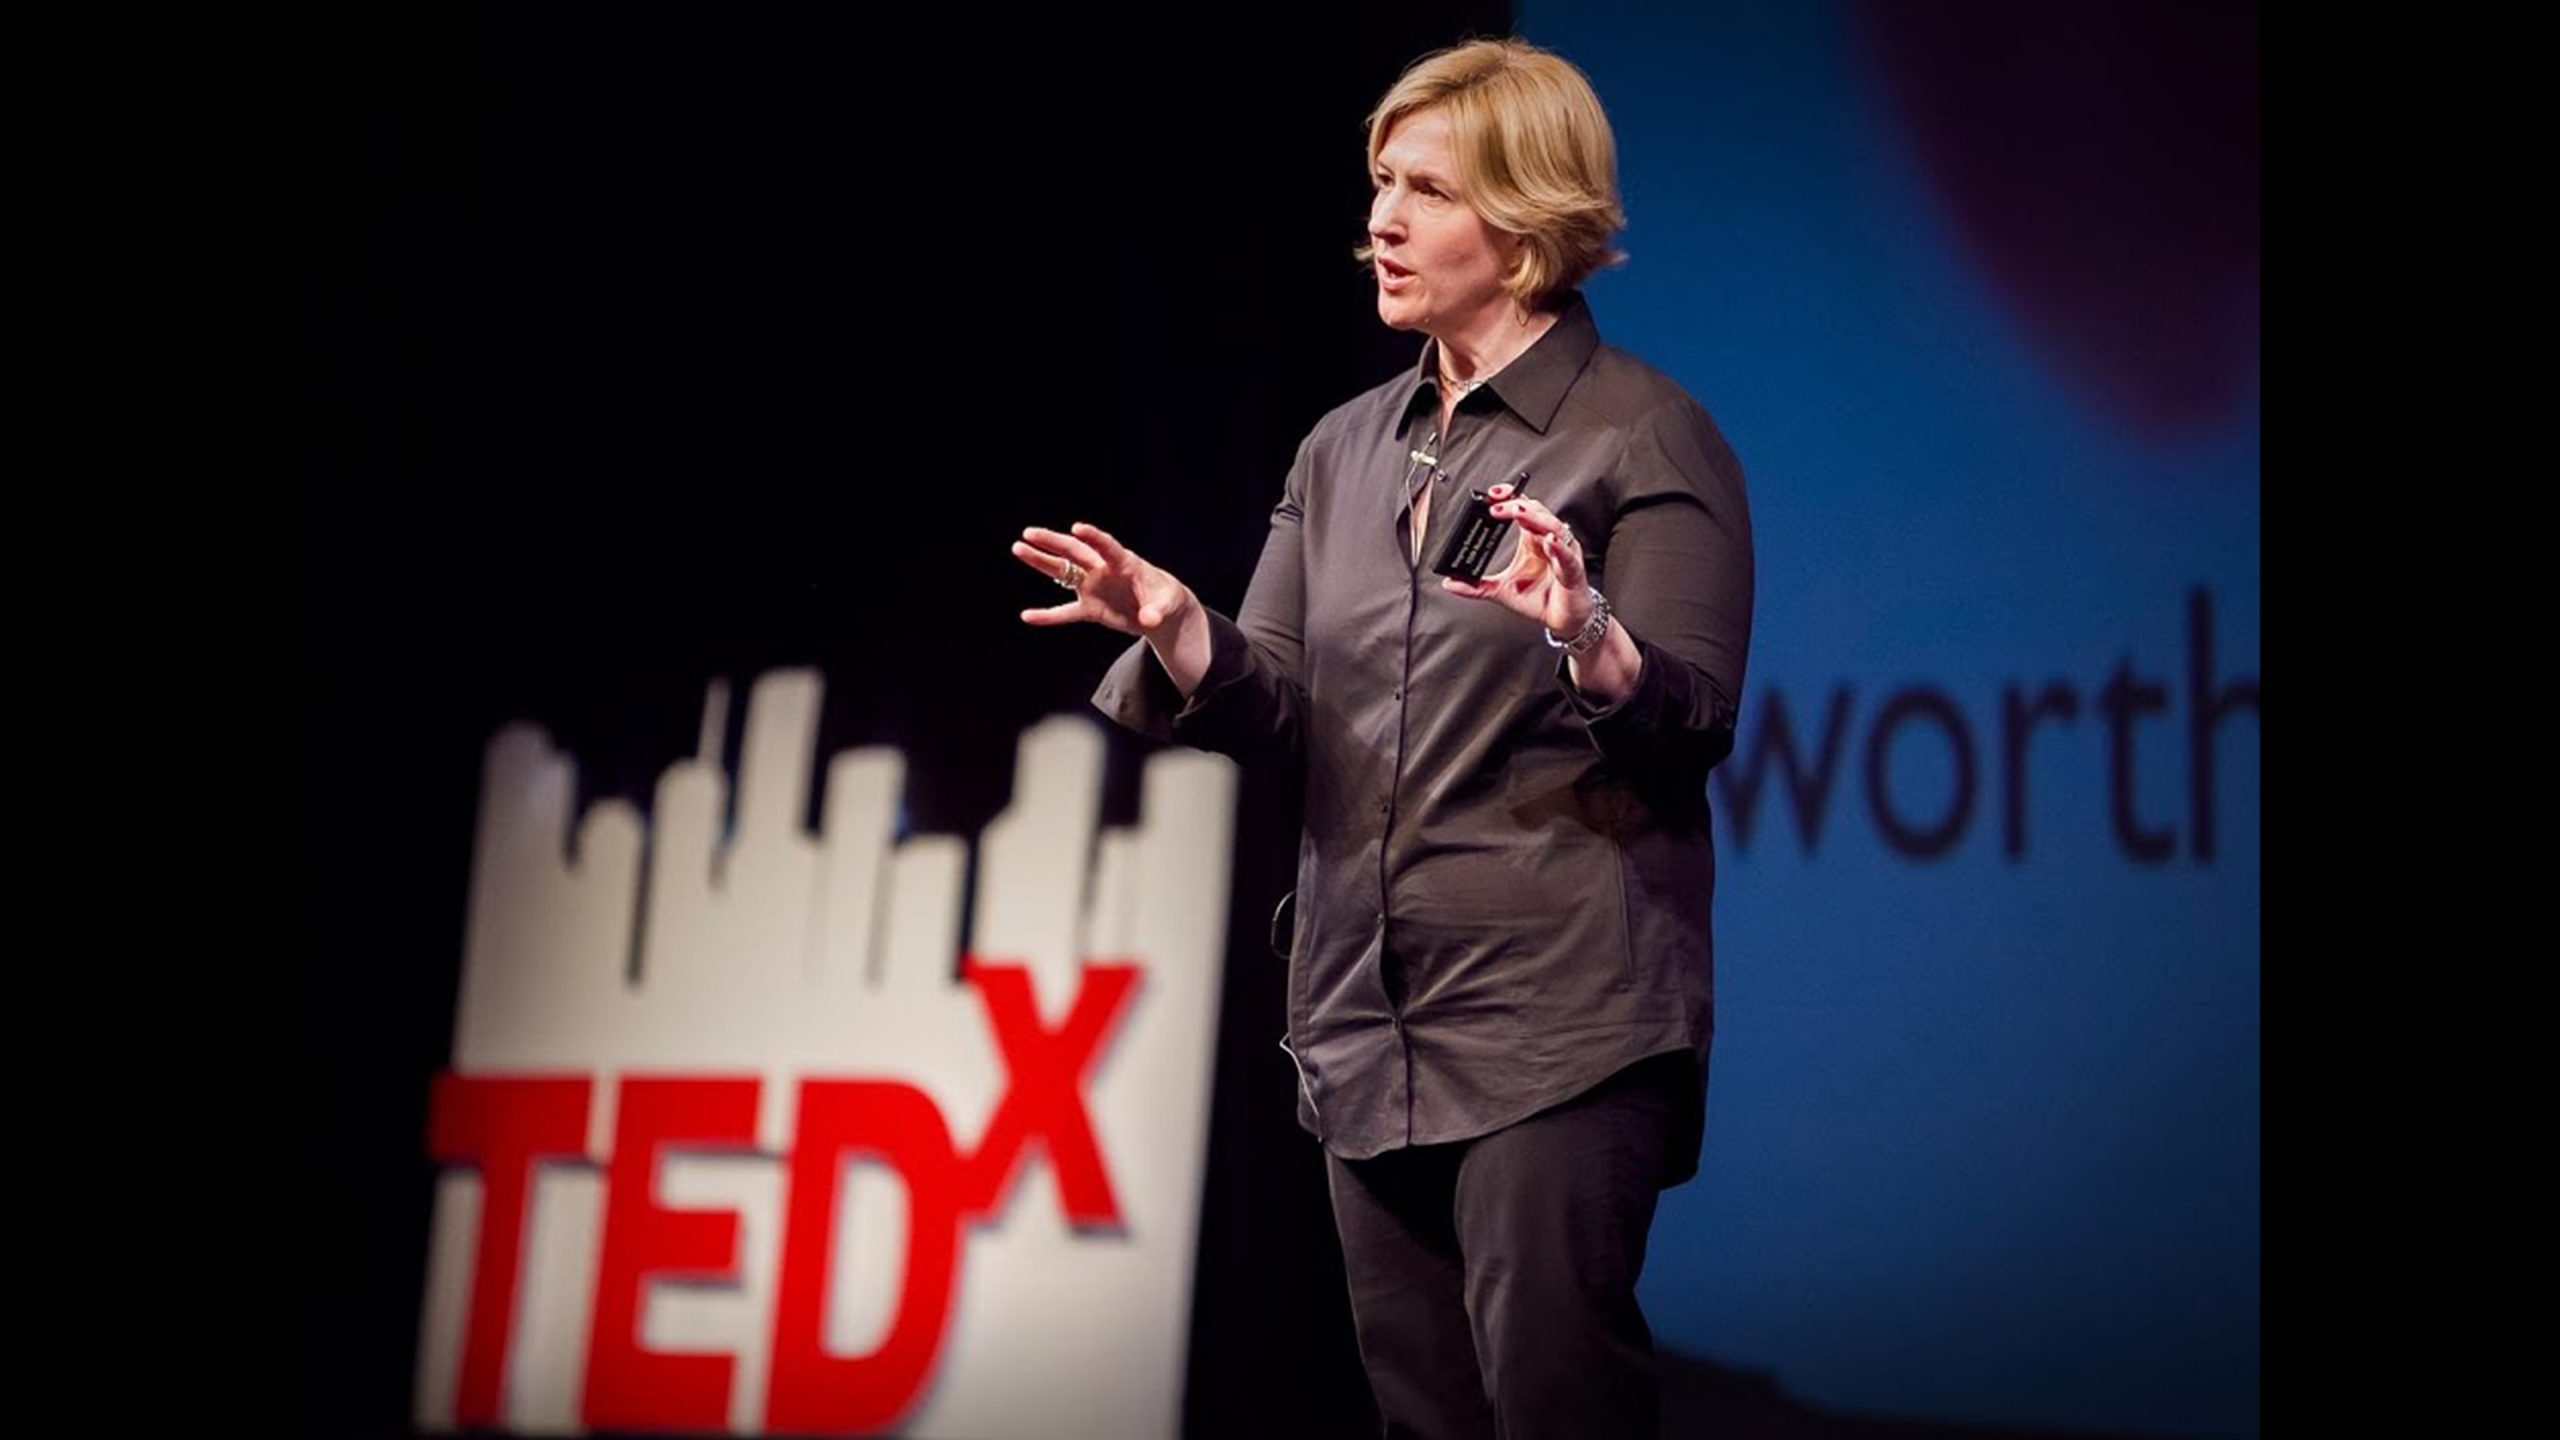 TEDx Talk - The Power of Vulnerability